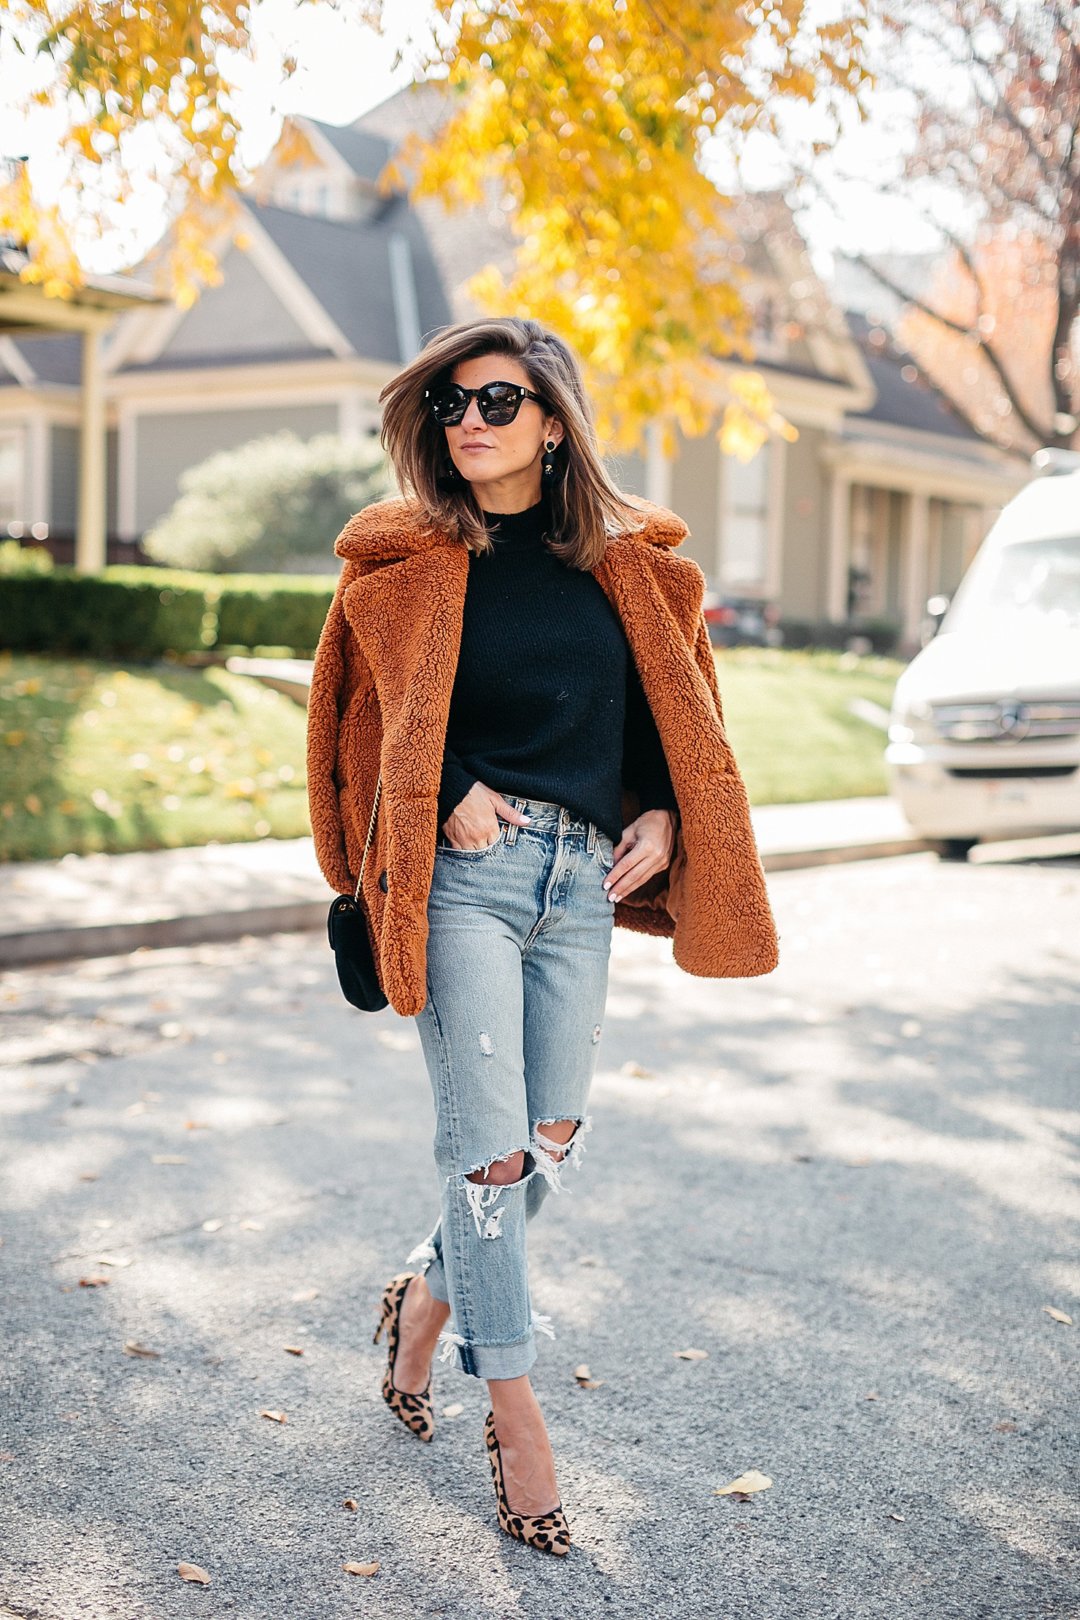 Best Winter Outfit Ideas For Women